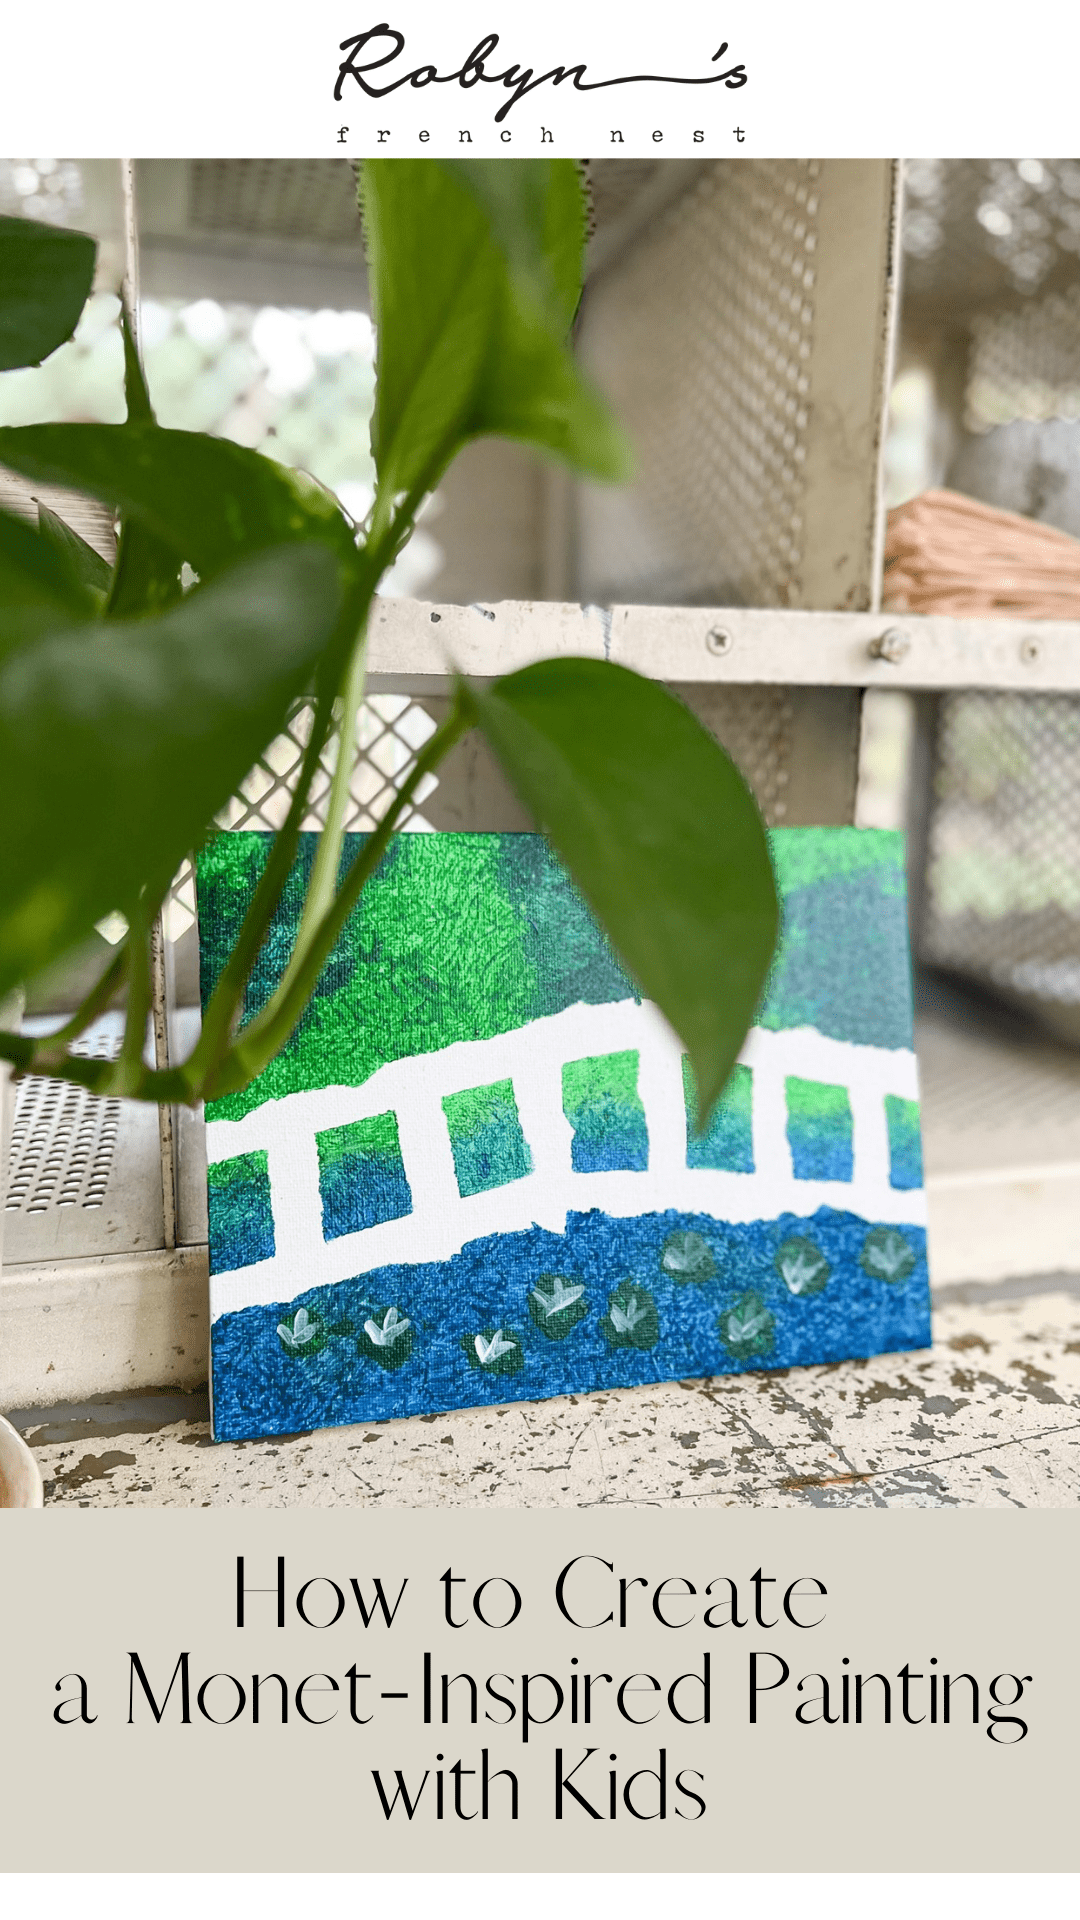 How to Make a Monet Inspired Painting with Kids